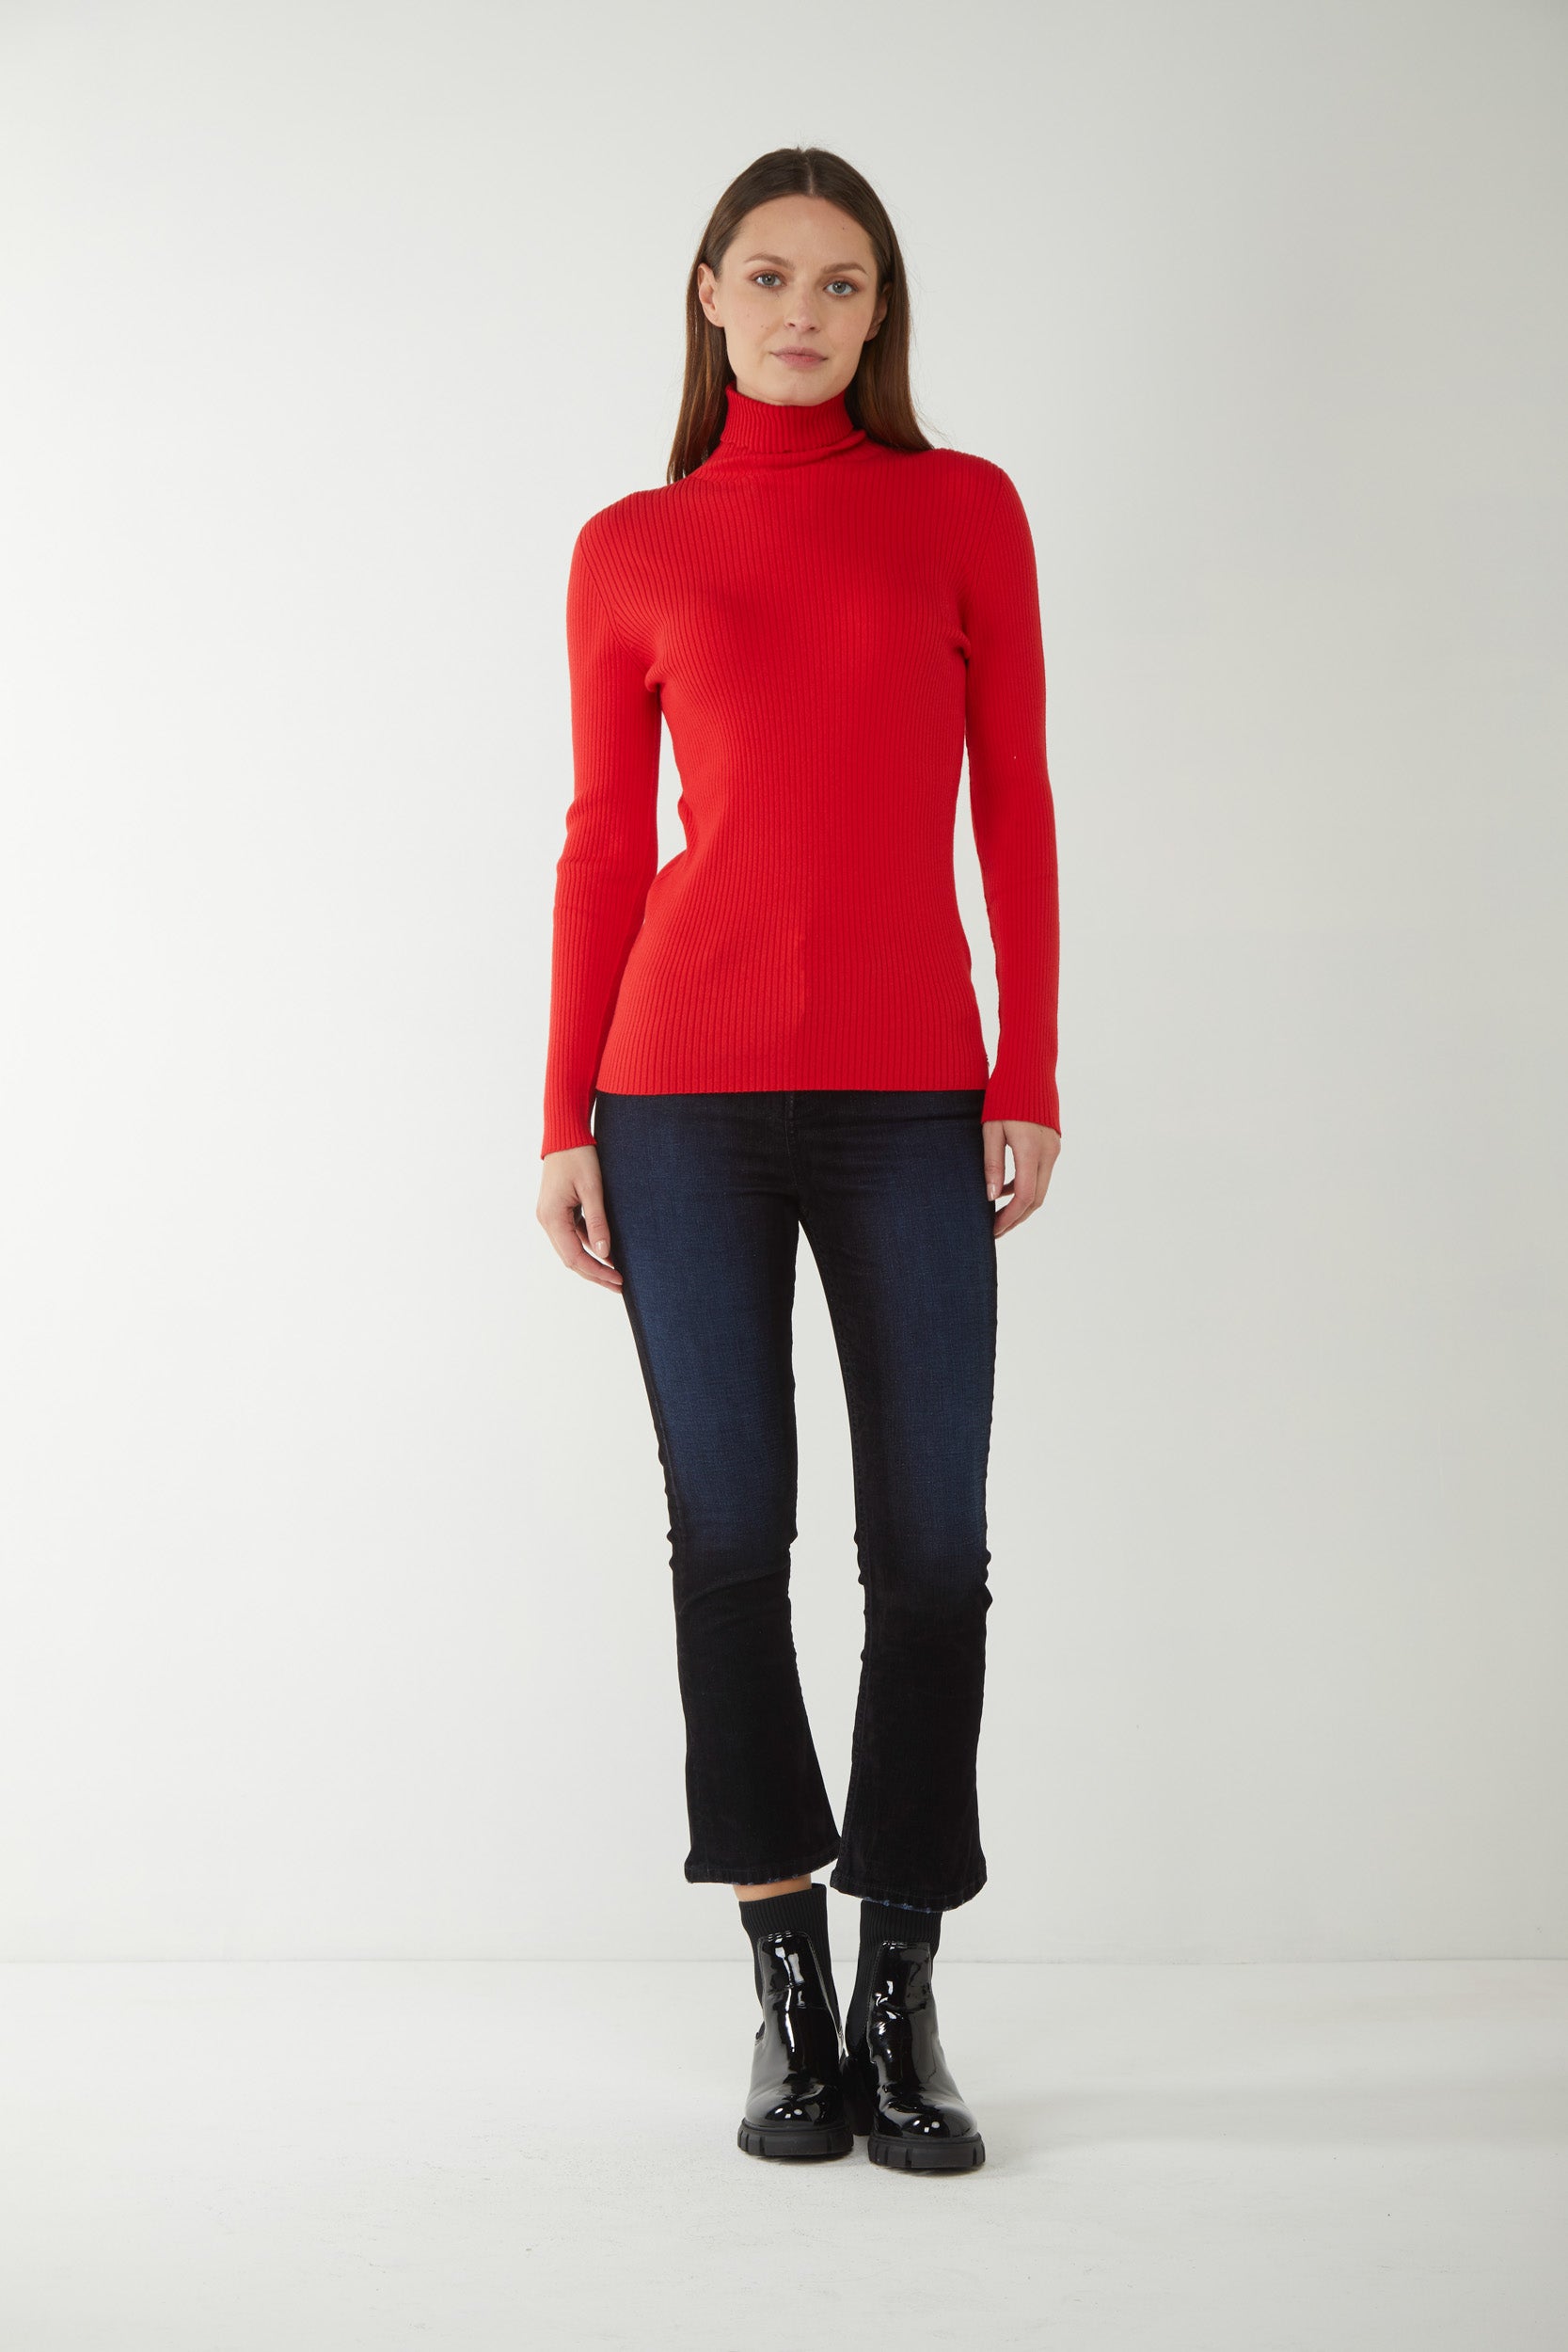 TWINSET Red Turtleneck